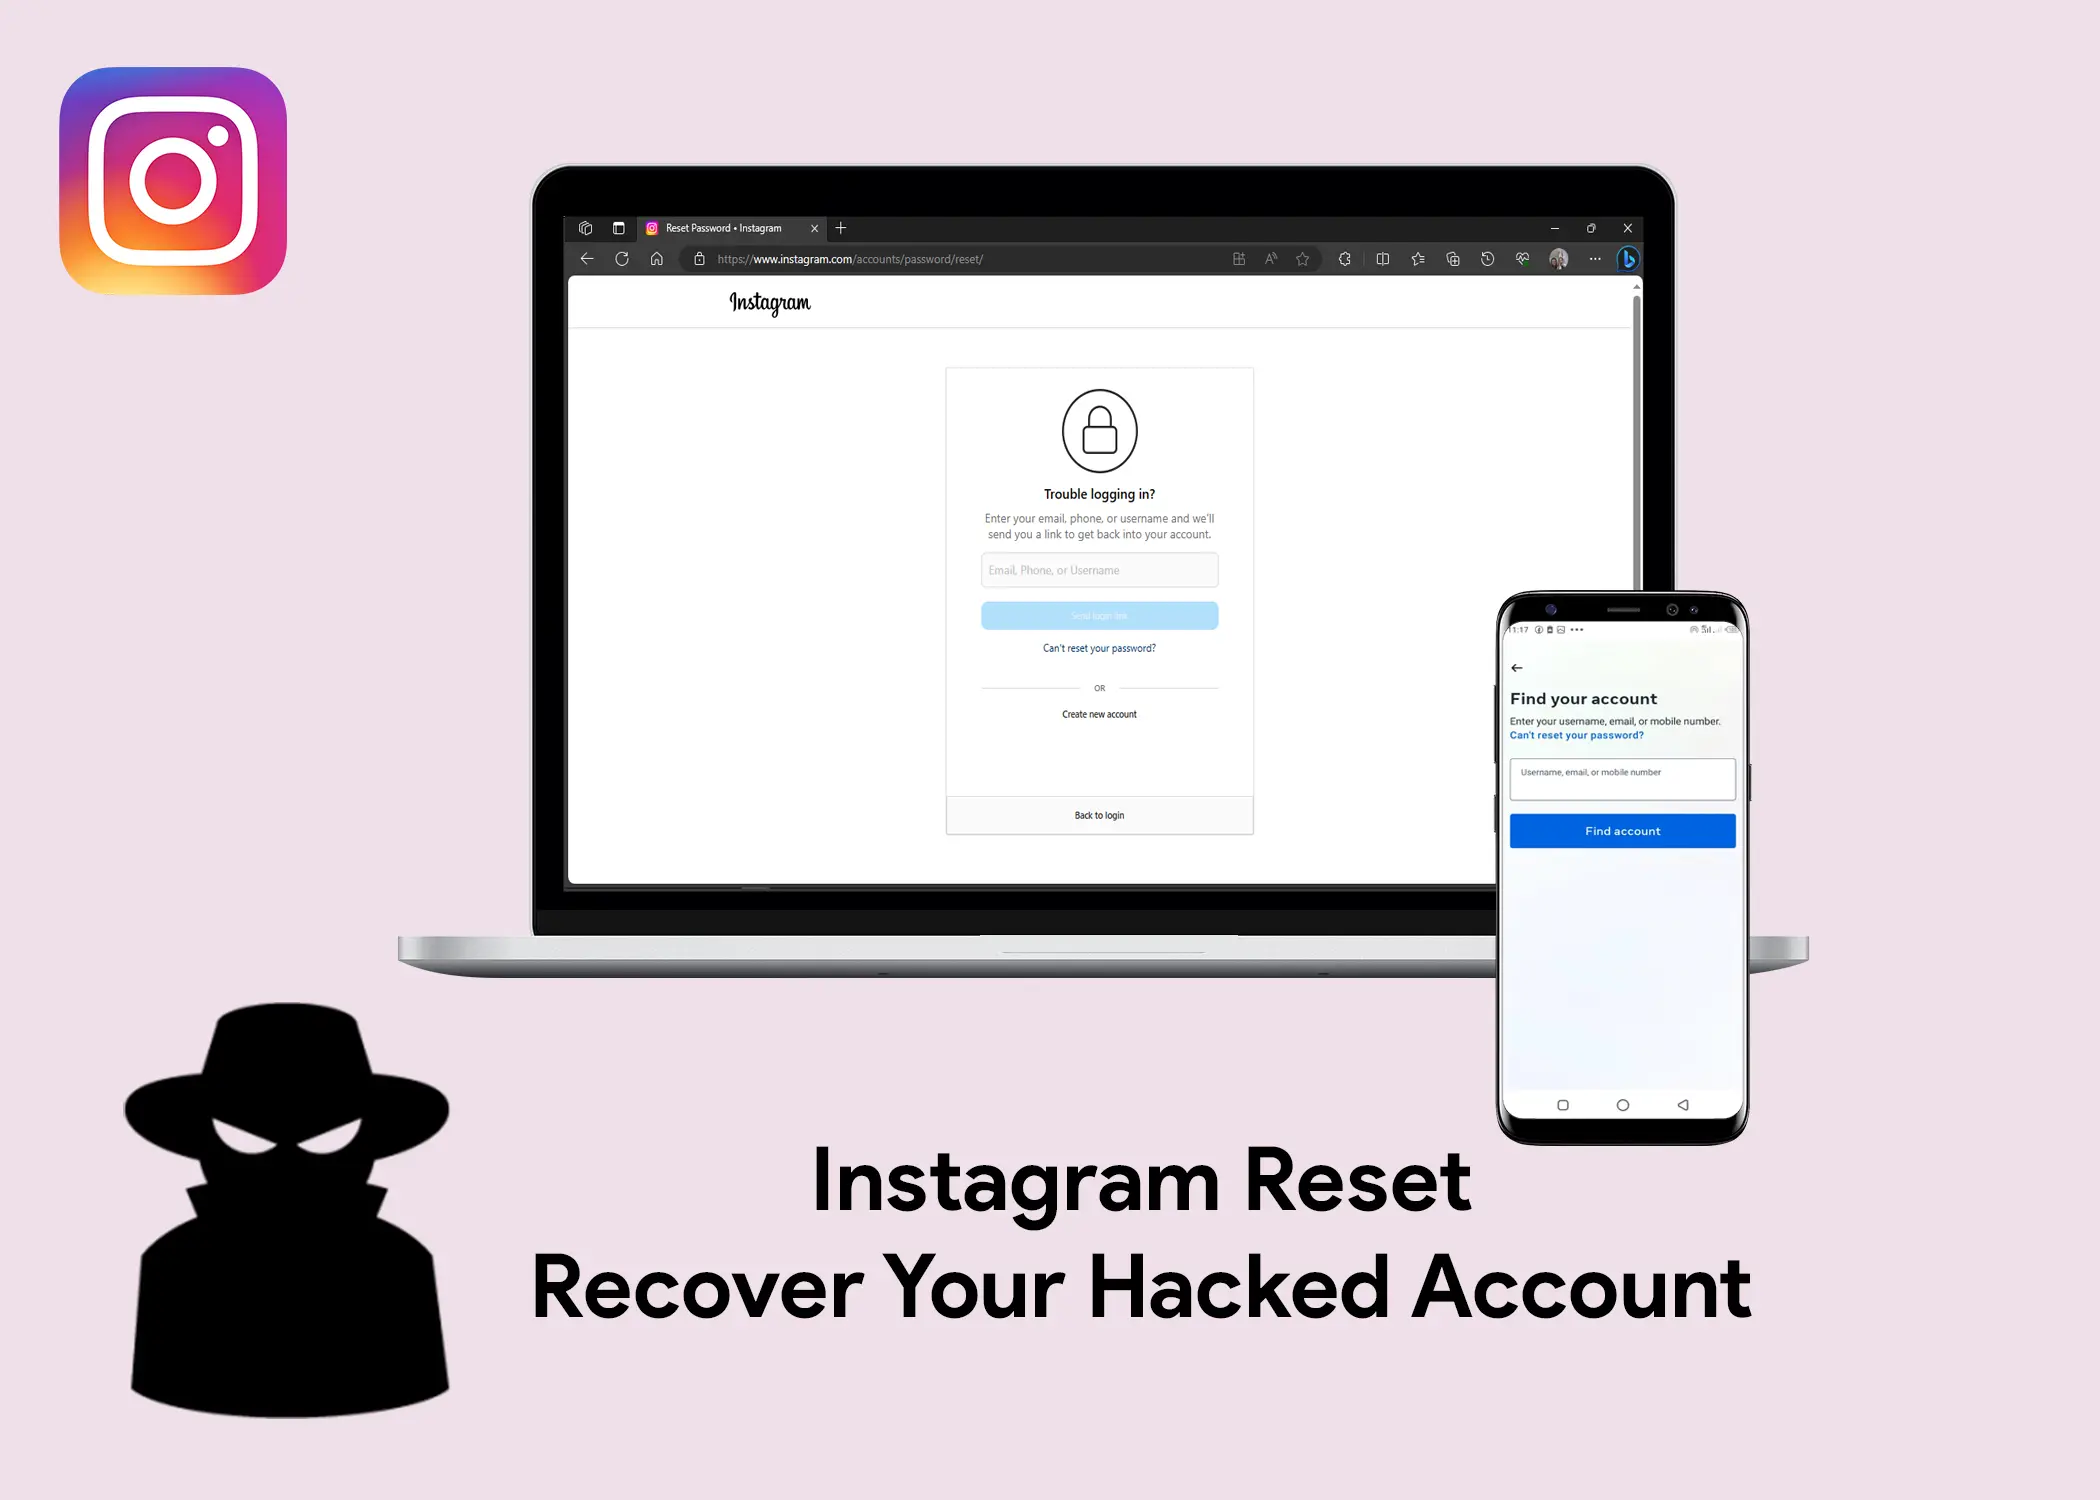 Instagram Reset – How to Recover Your Hacked Account